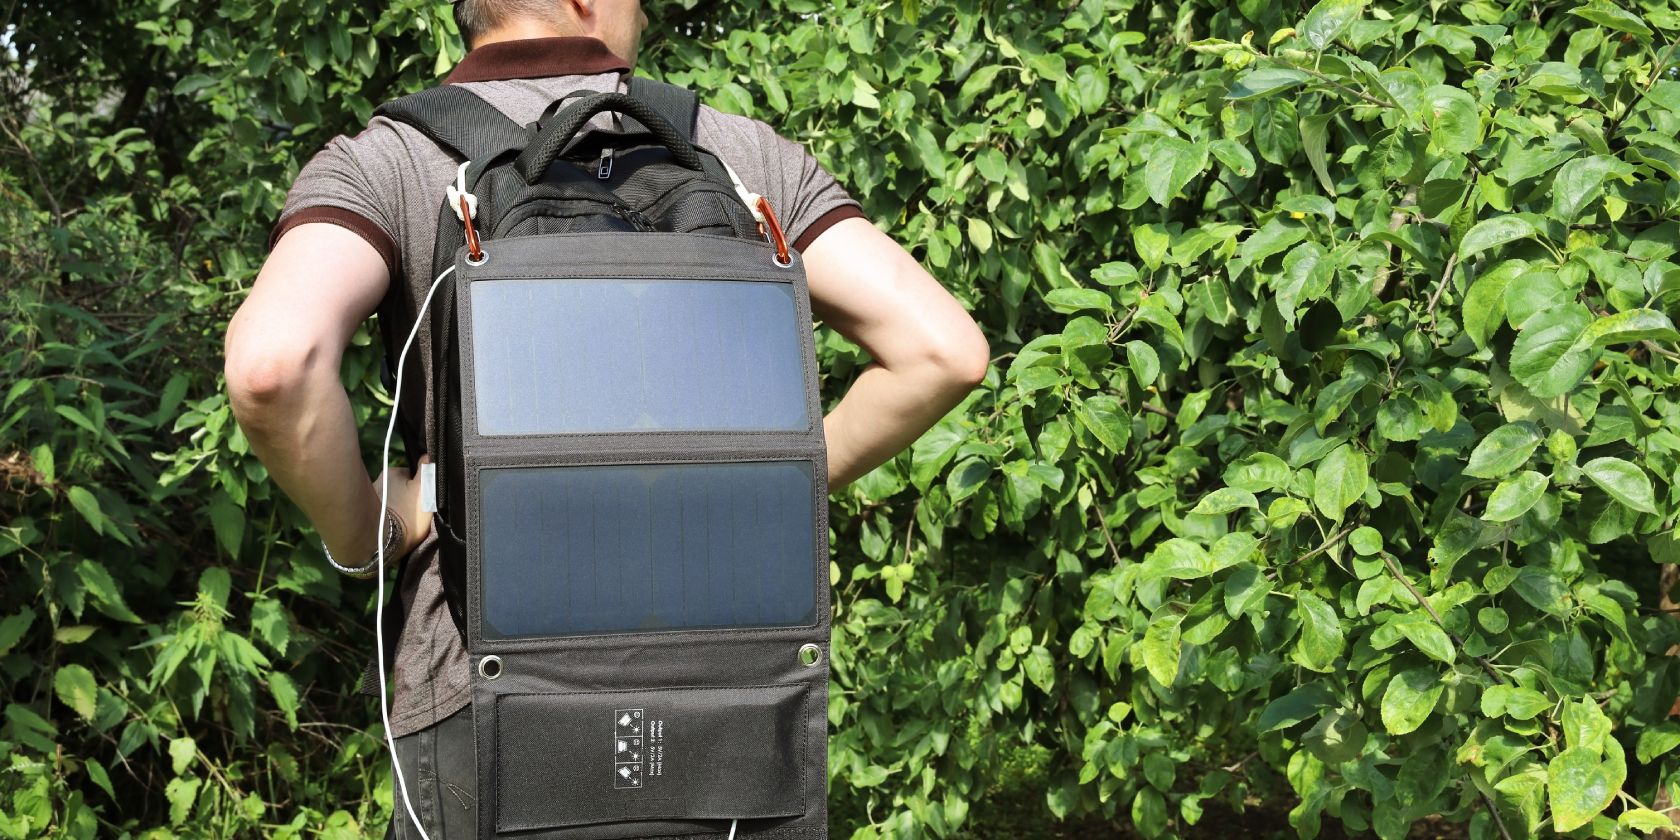 The world's smallest solar panel power bank is slightly larger than a  credit card - Yanko Design